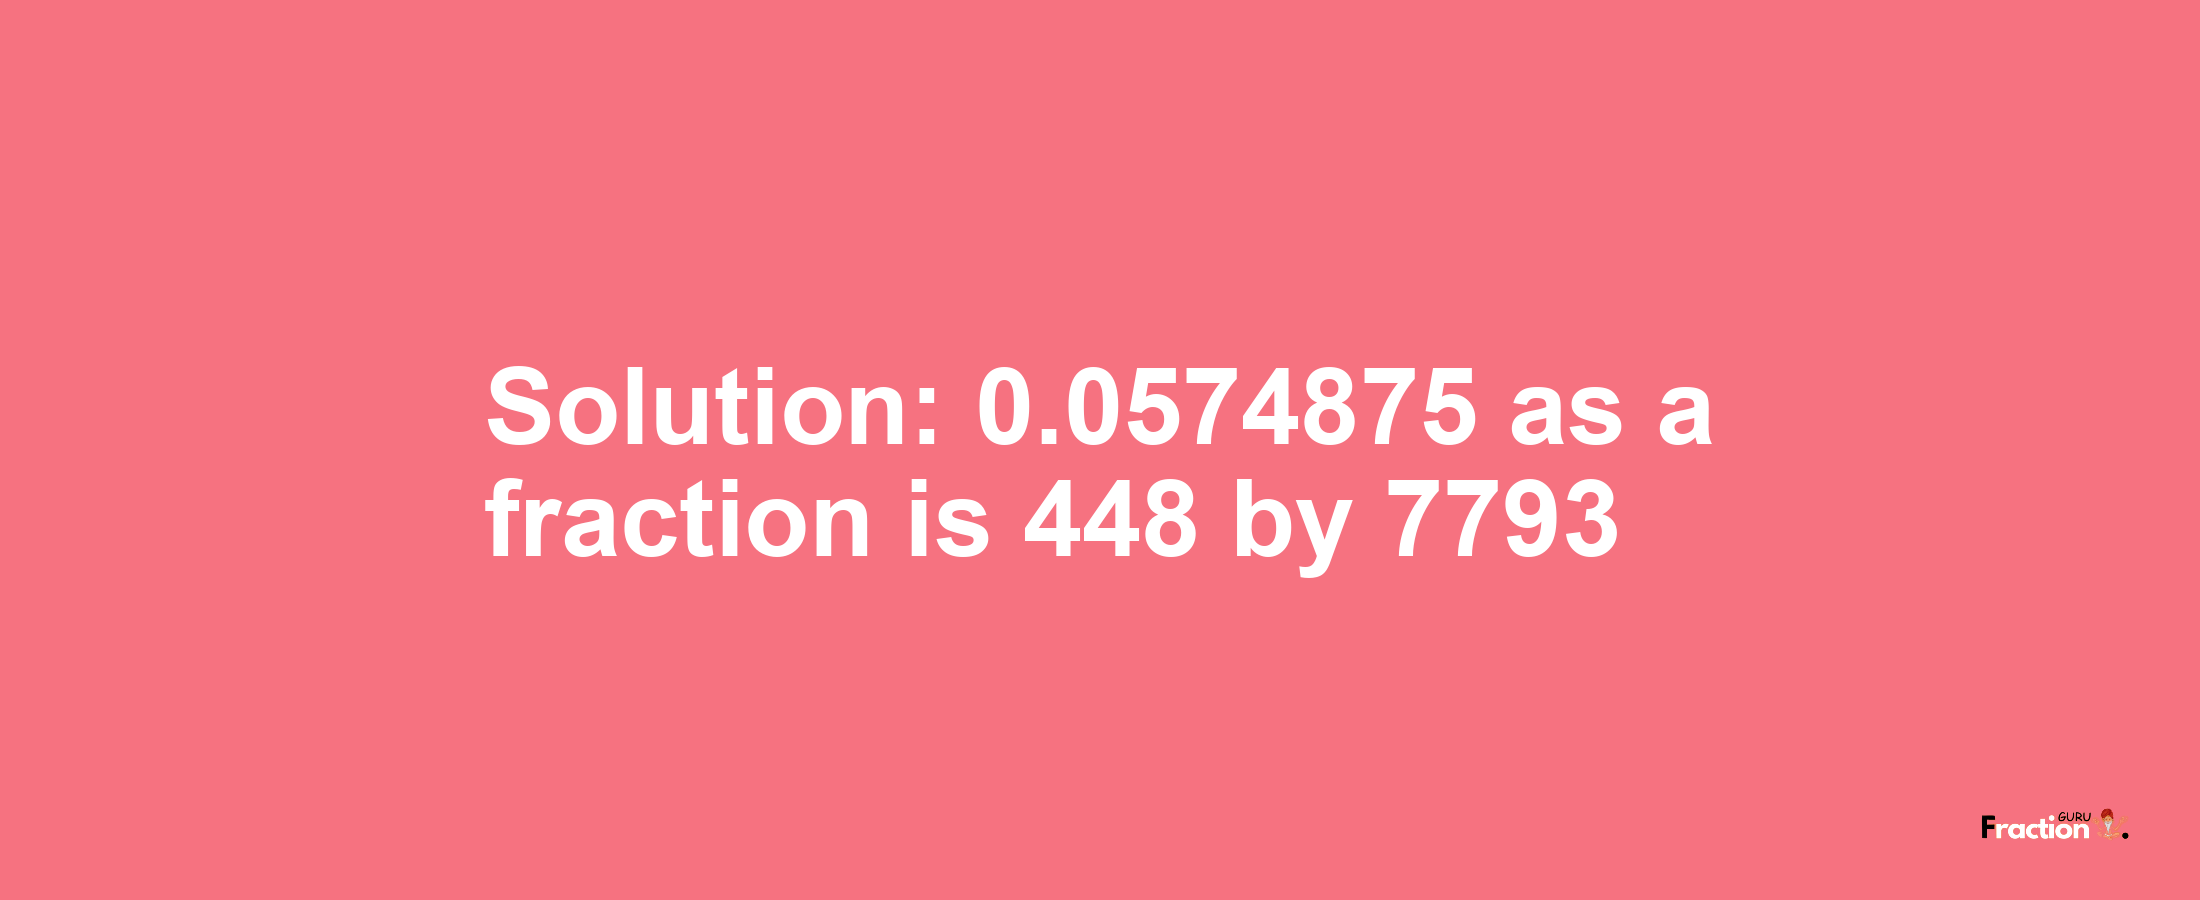 Solution:0.0574875 as a fraction is 448/7793